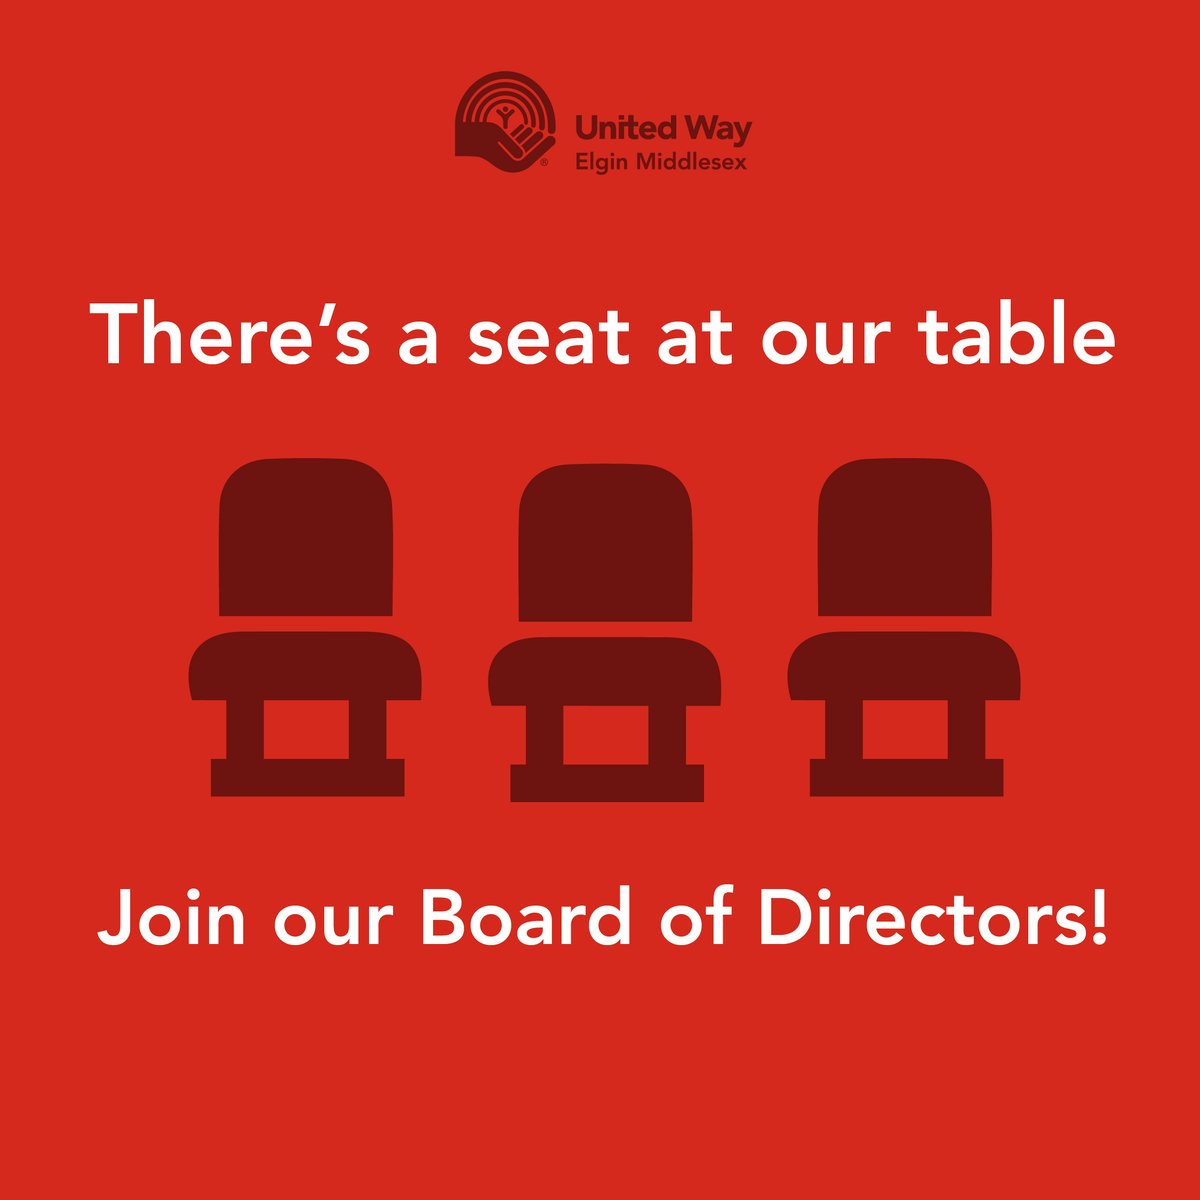 🌟 Are you passionate about making a difference in your community? We are currently looking for dedicated individuals to join our board of directors! Apply today and help us create positive change! 🌟 #BoardMemberRecruitment #United
ow.ly/YT7050QIJWE